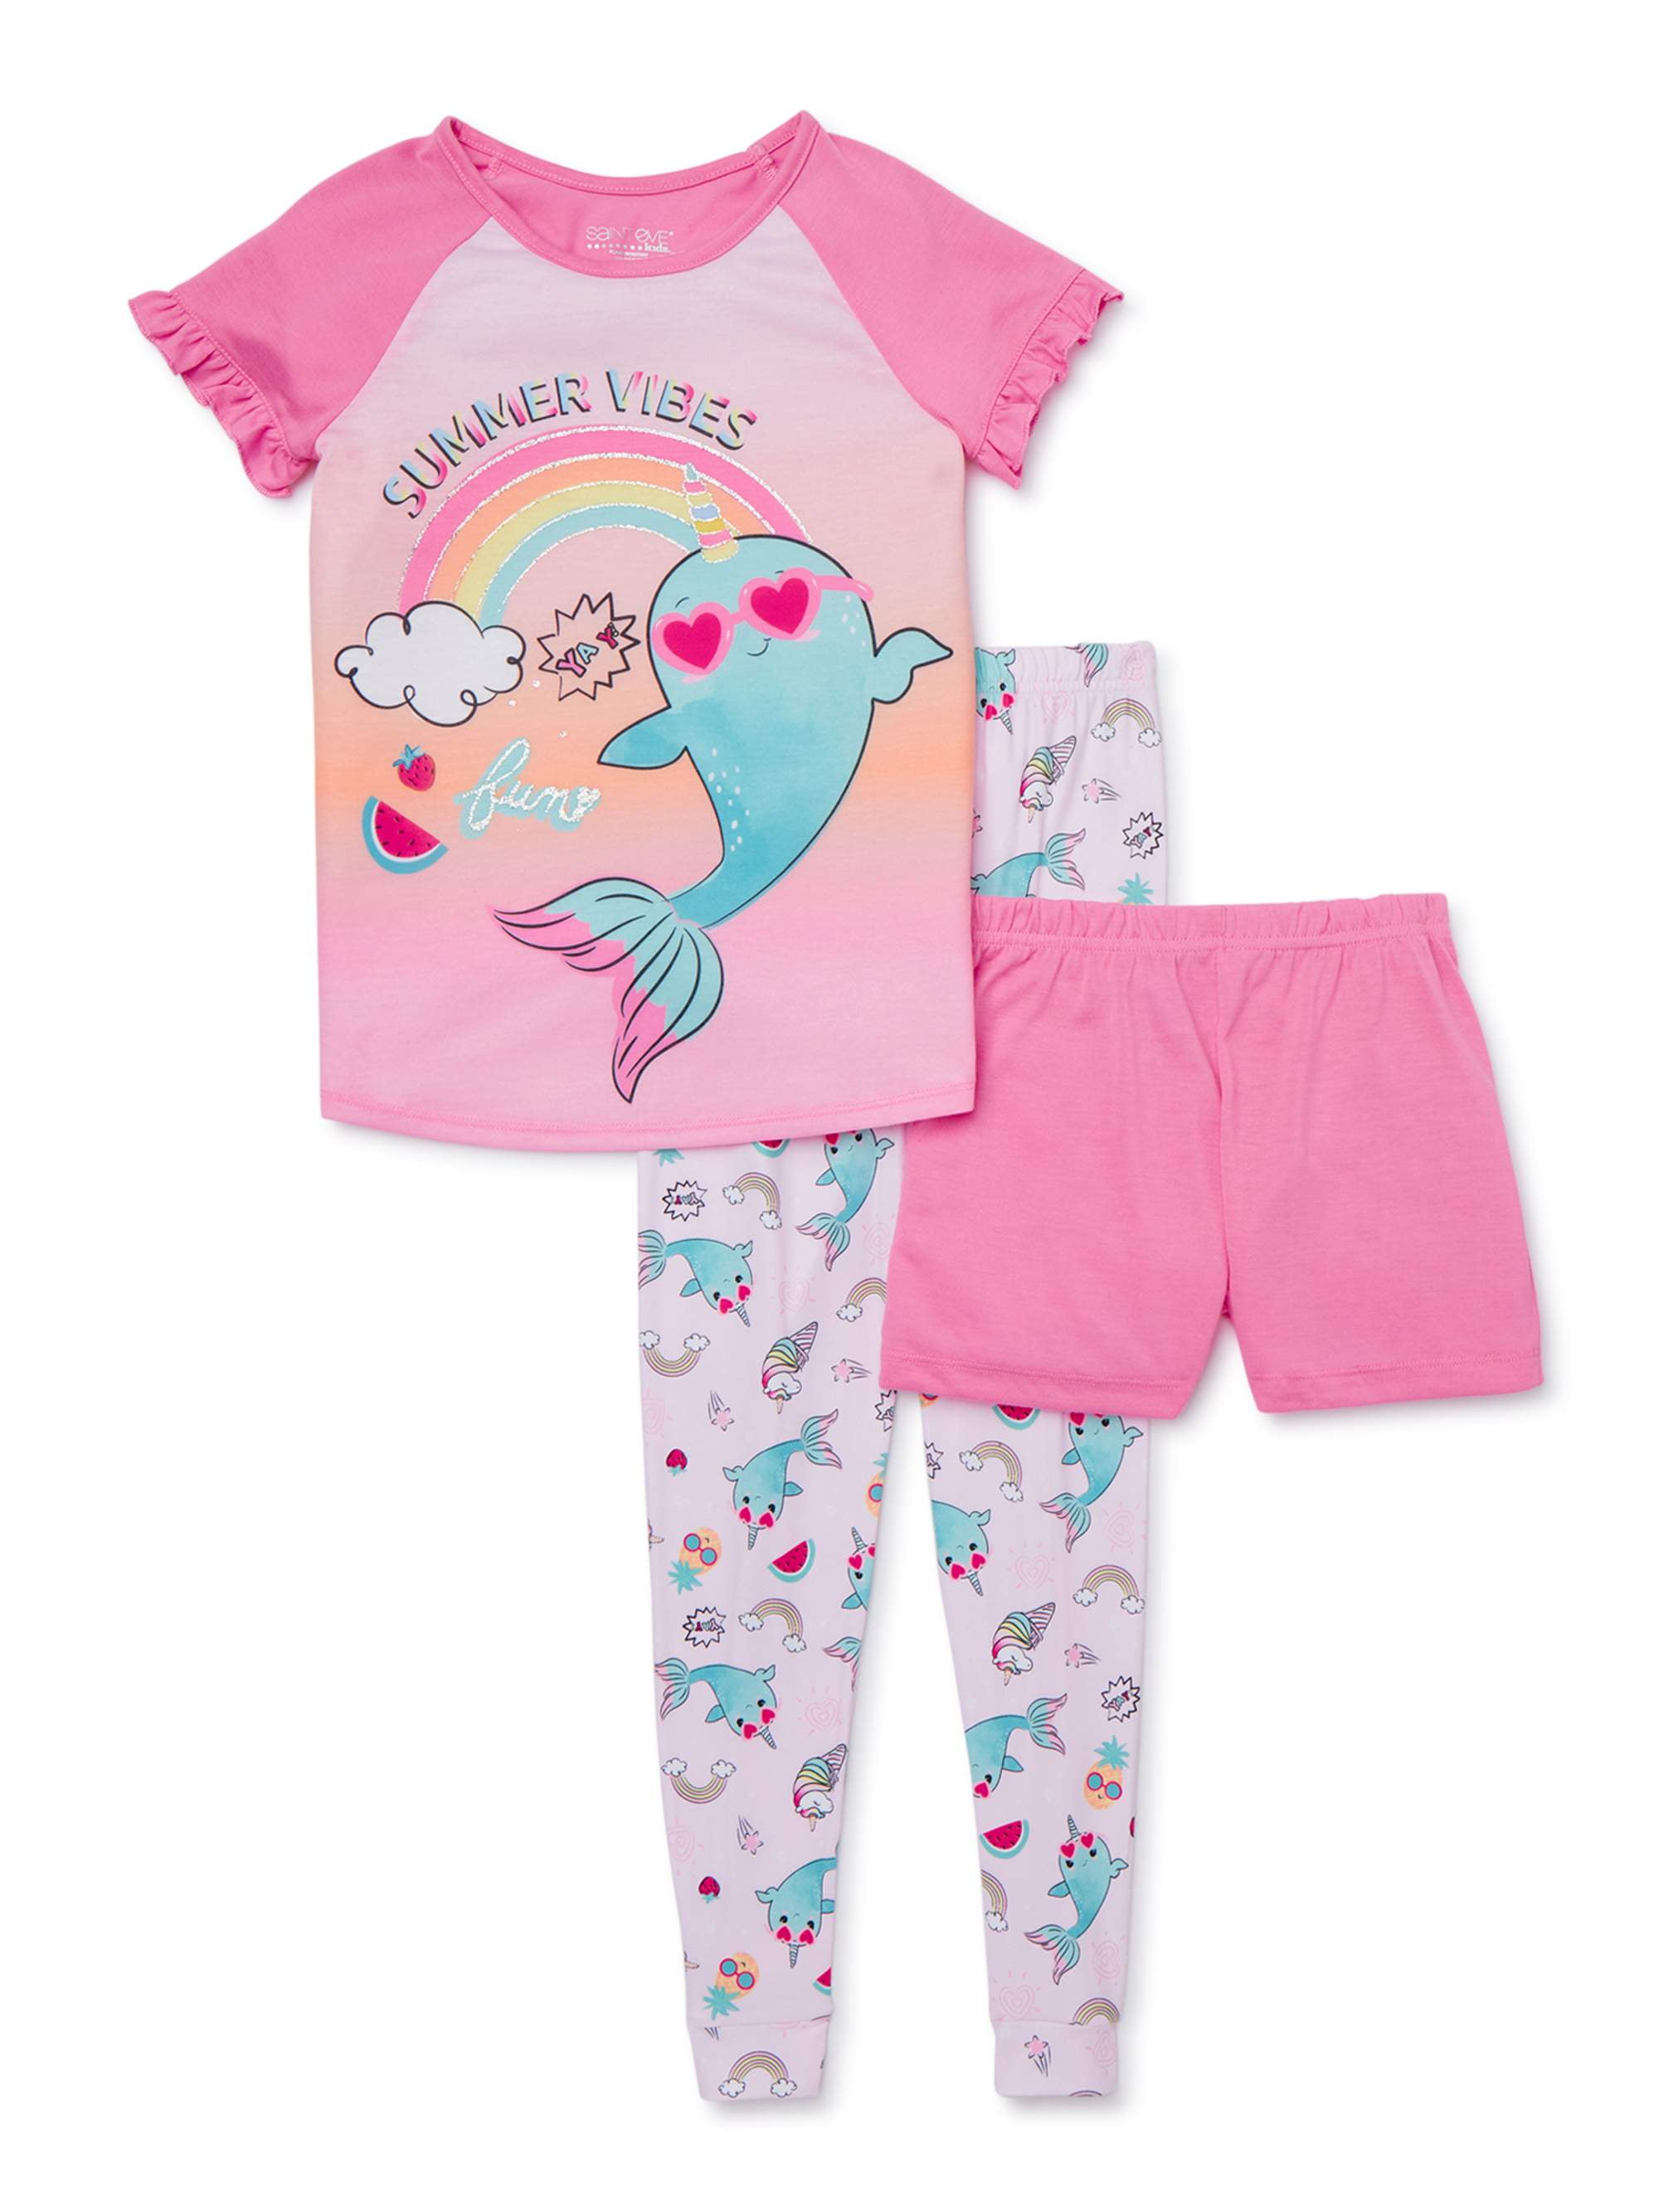 Size 18M NWT Carter's Girls 3 Piece Short Sleeve Pajamas Sunglasses Loose Fit 